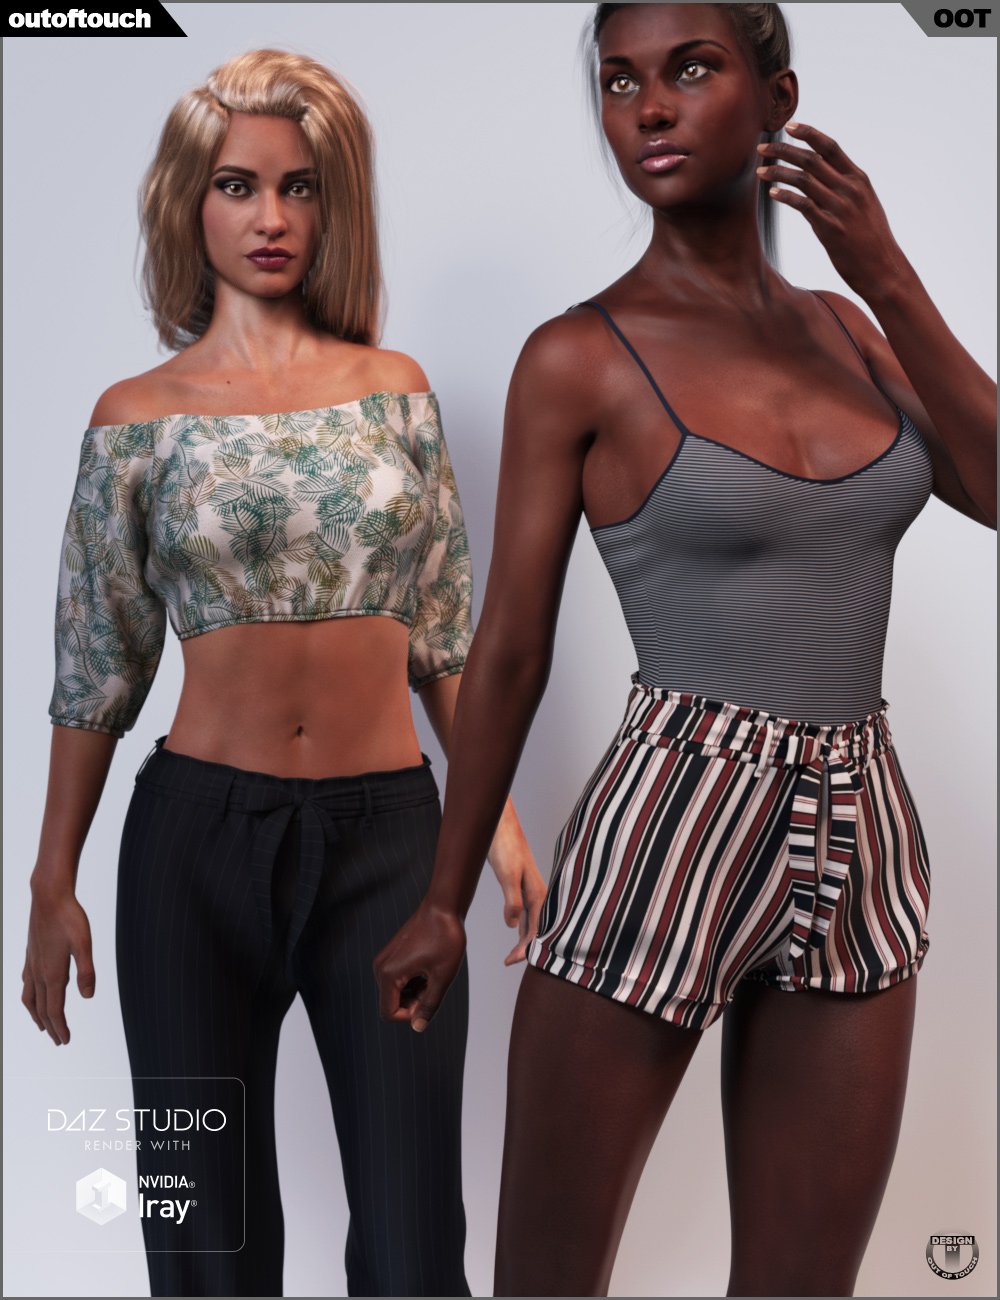 Texture Expansion for MEGA Wardrobe 2 by: outoftouch, 3D Models by Daz 3D